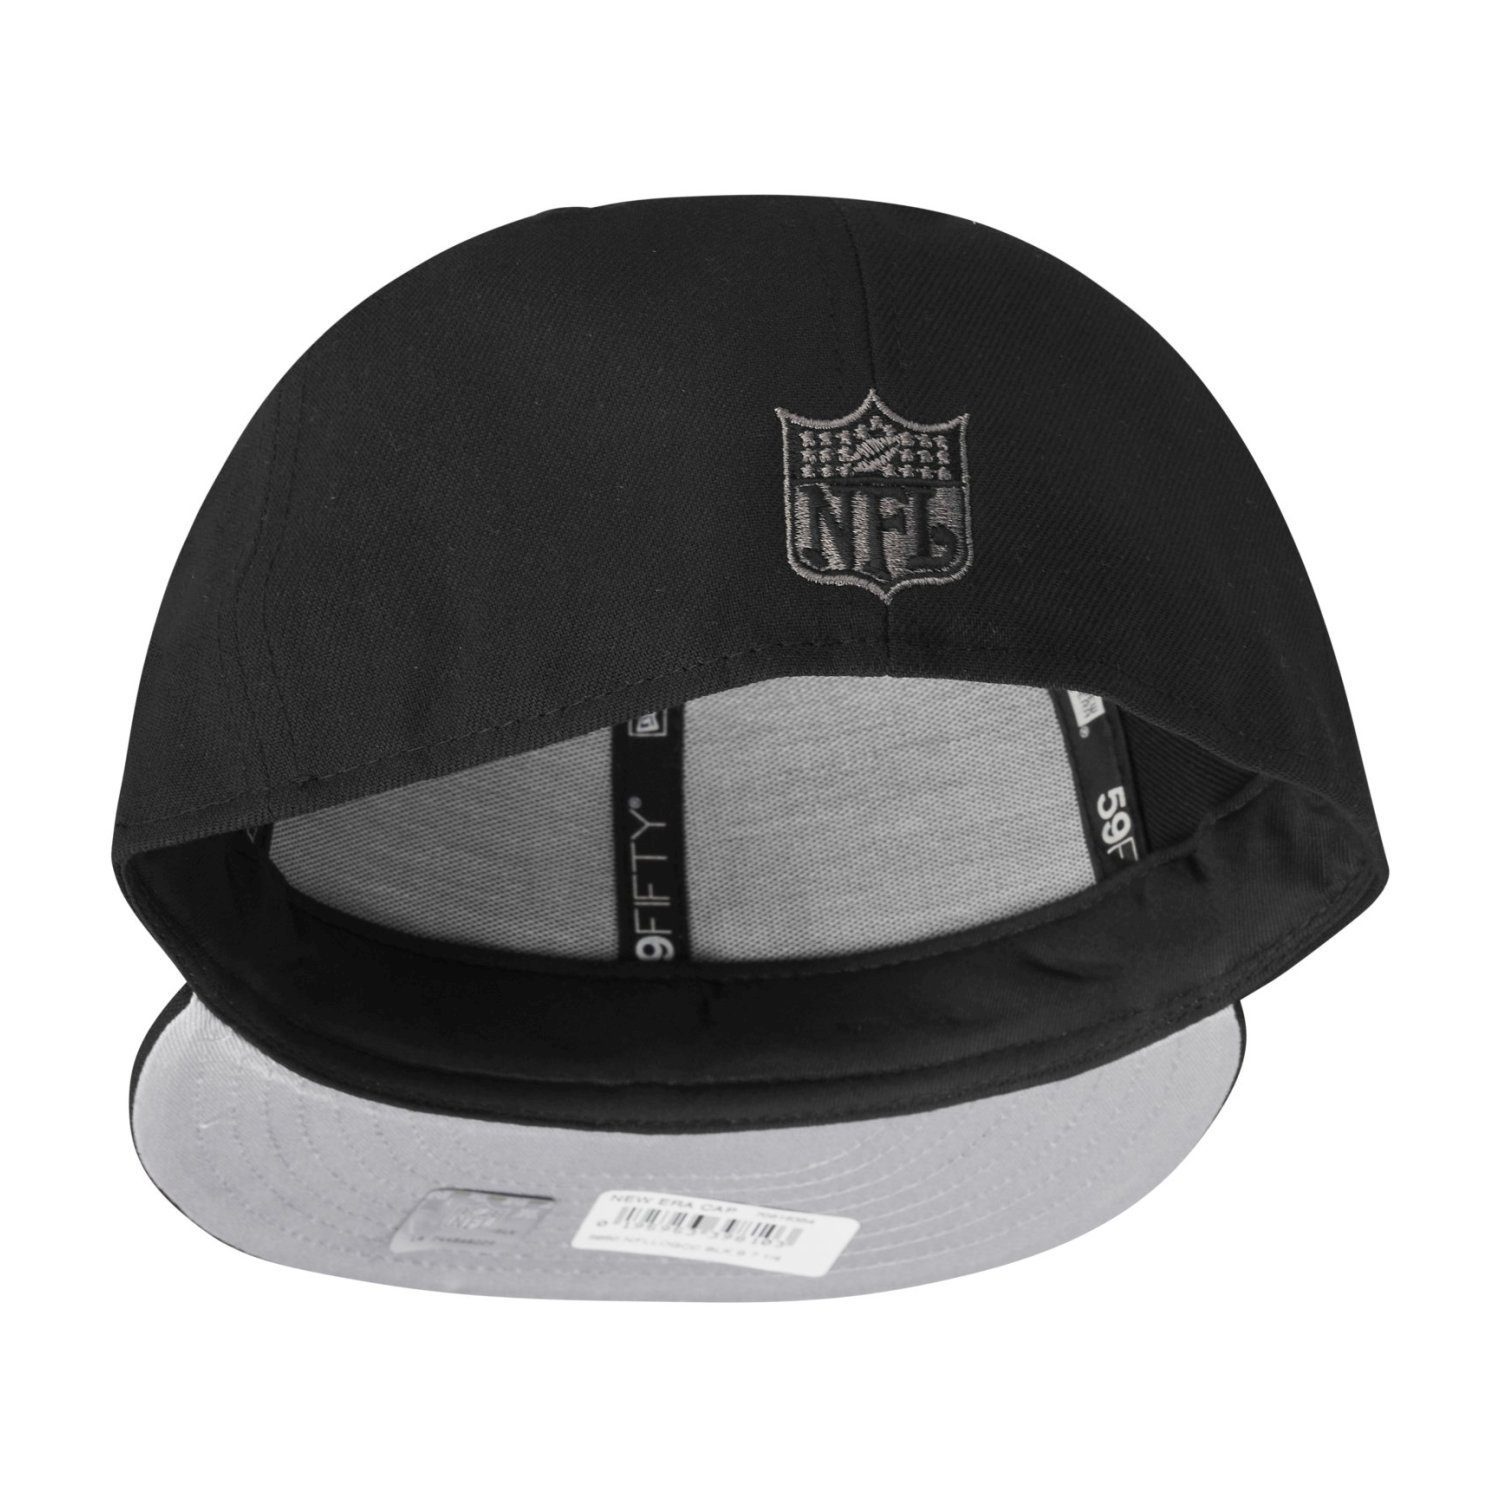 SHIELD NFL Cap New Era NFL Fitted TEAMS 59Fifty